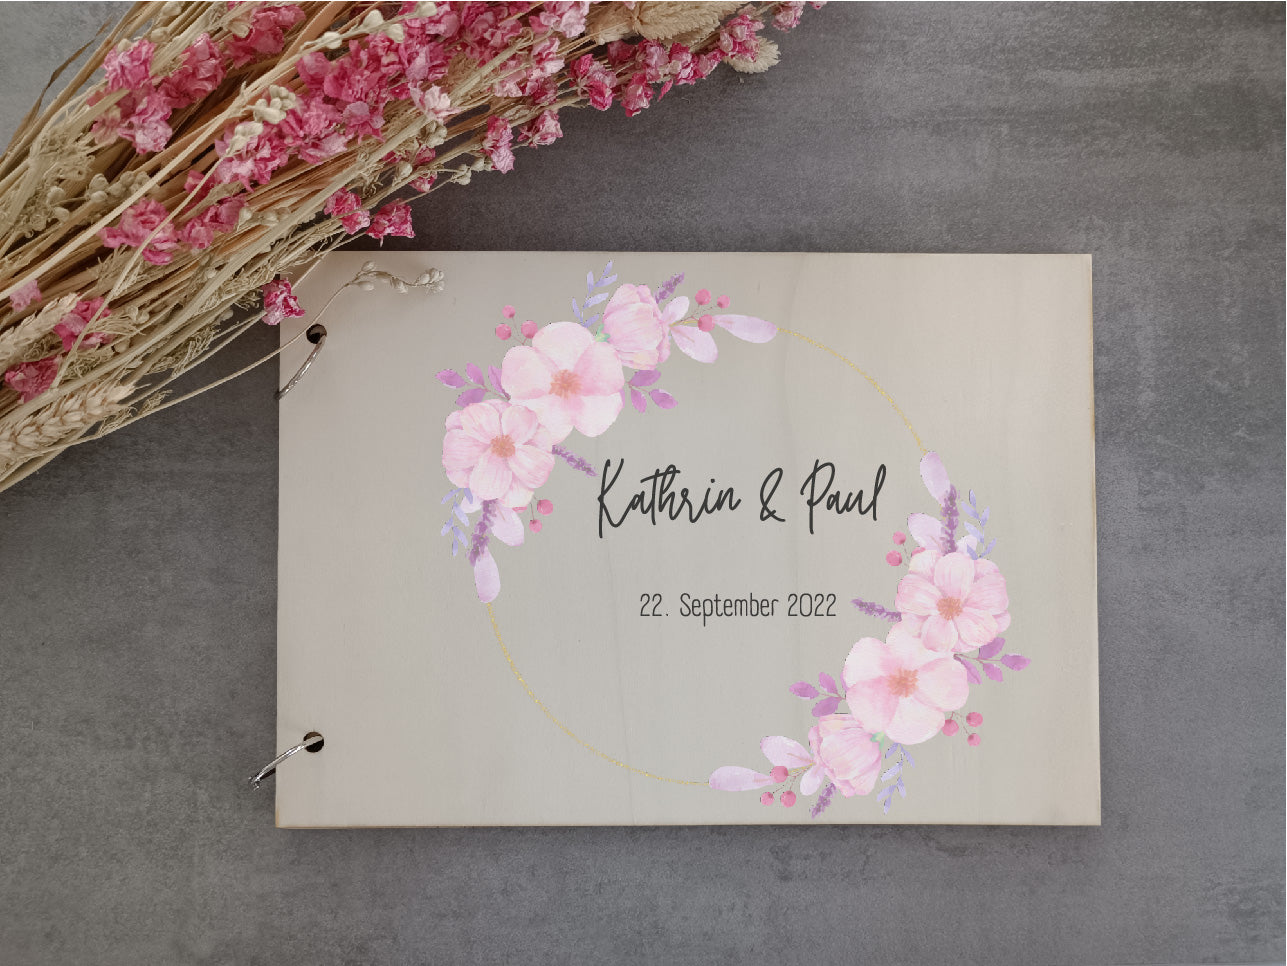 Wedding memory book guest book photo book made of wood personalized with your names and dates